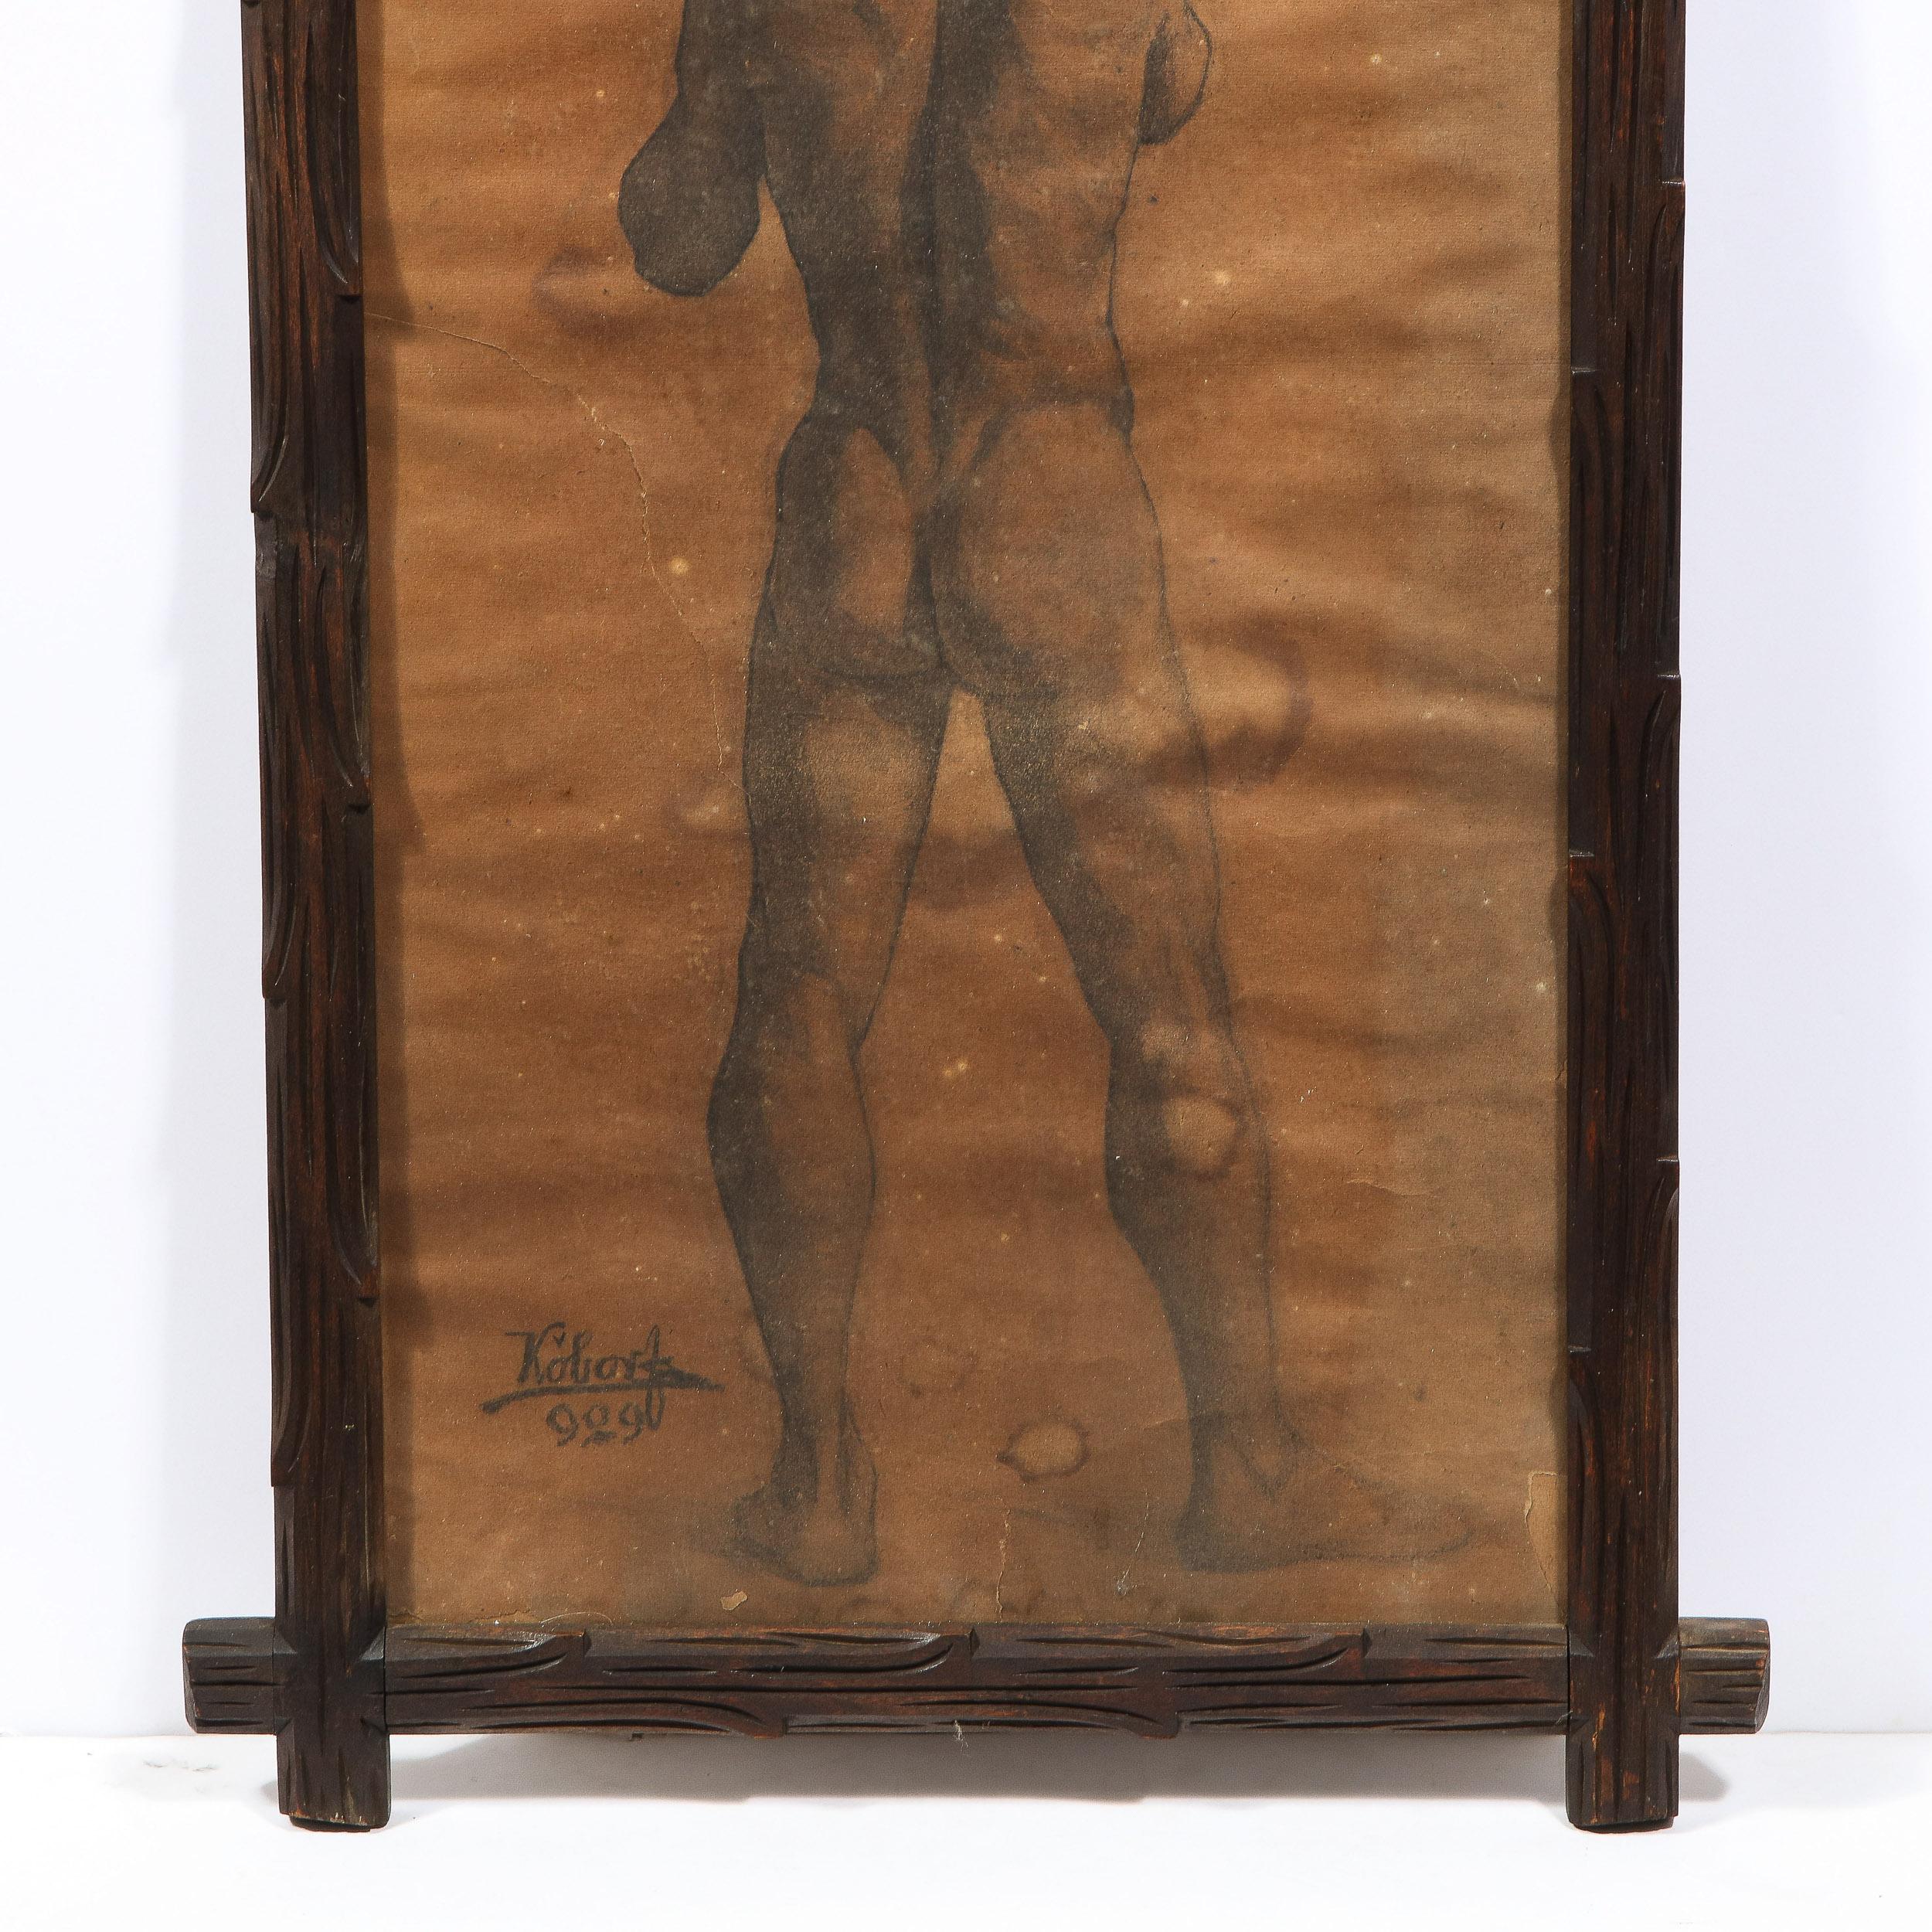 Untitled Nude Male Diptych, Charcoal/ Graphite on Parchment by Henrik Kóbor  1